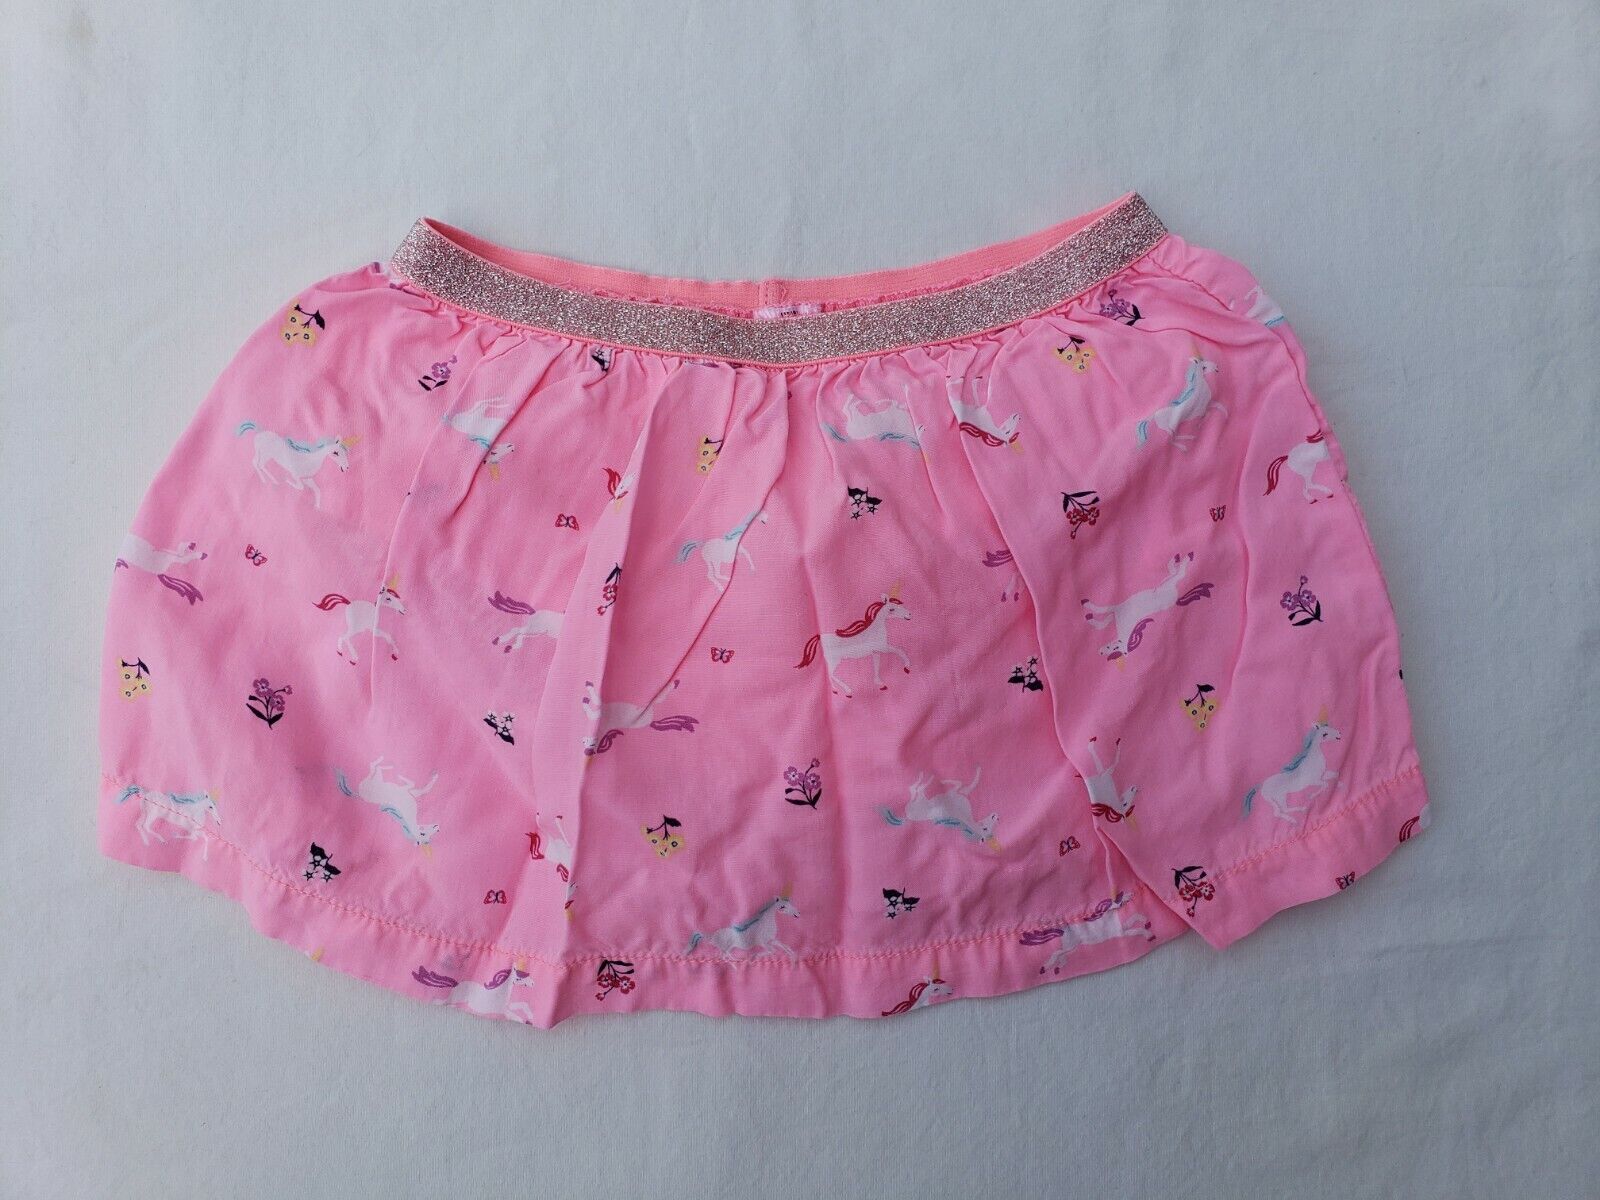 Carter's Baby Girl Skirt Free Shipping New months 18 - Minneapolis Mall Size